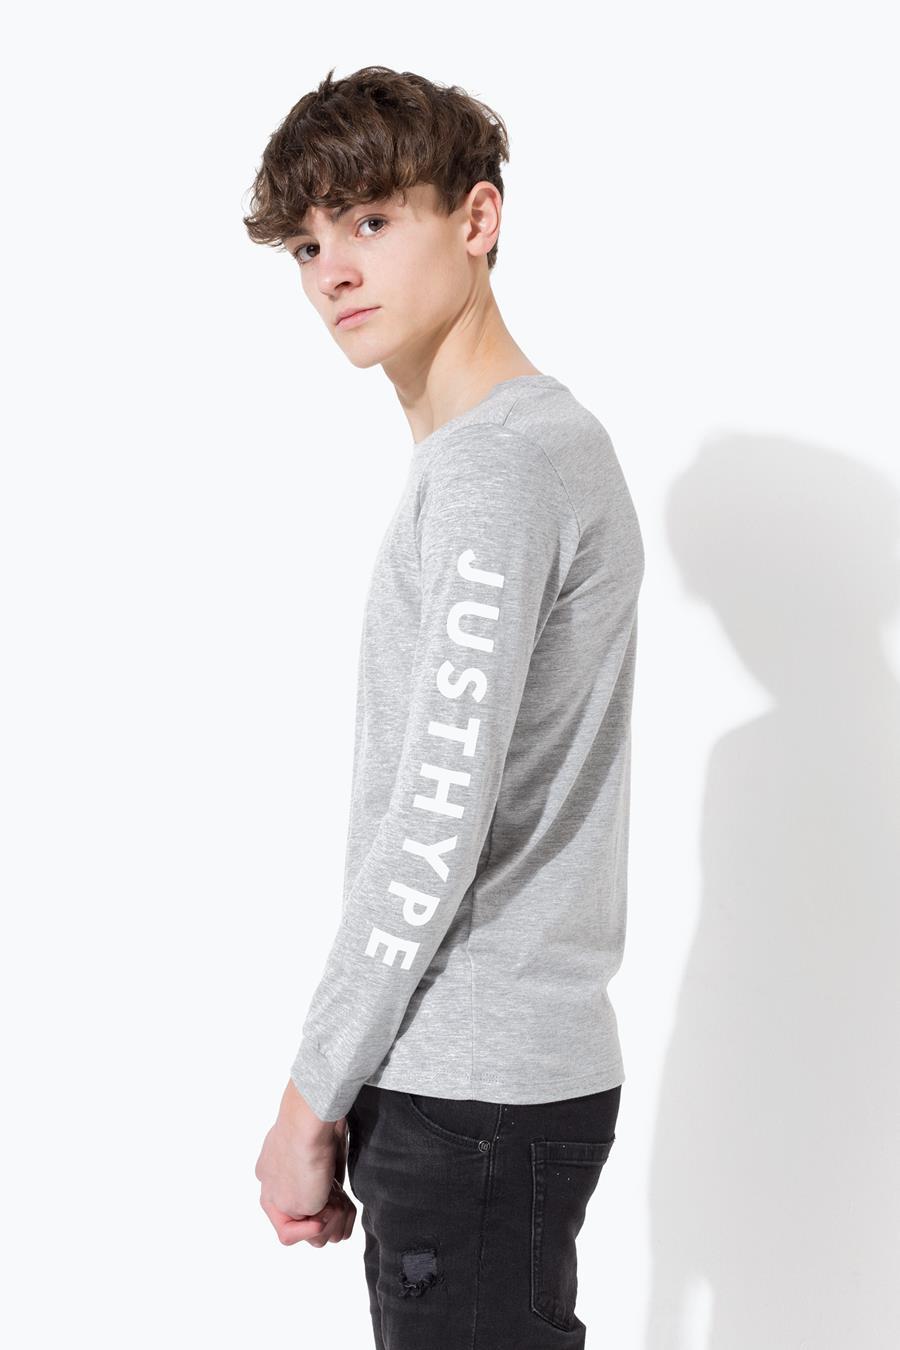 HYPE GREY JUSTHYPE KIDS L/S T-SHIRT